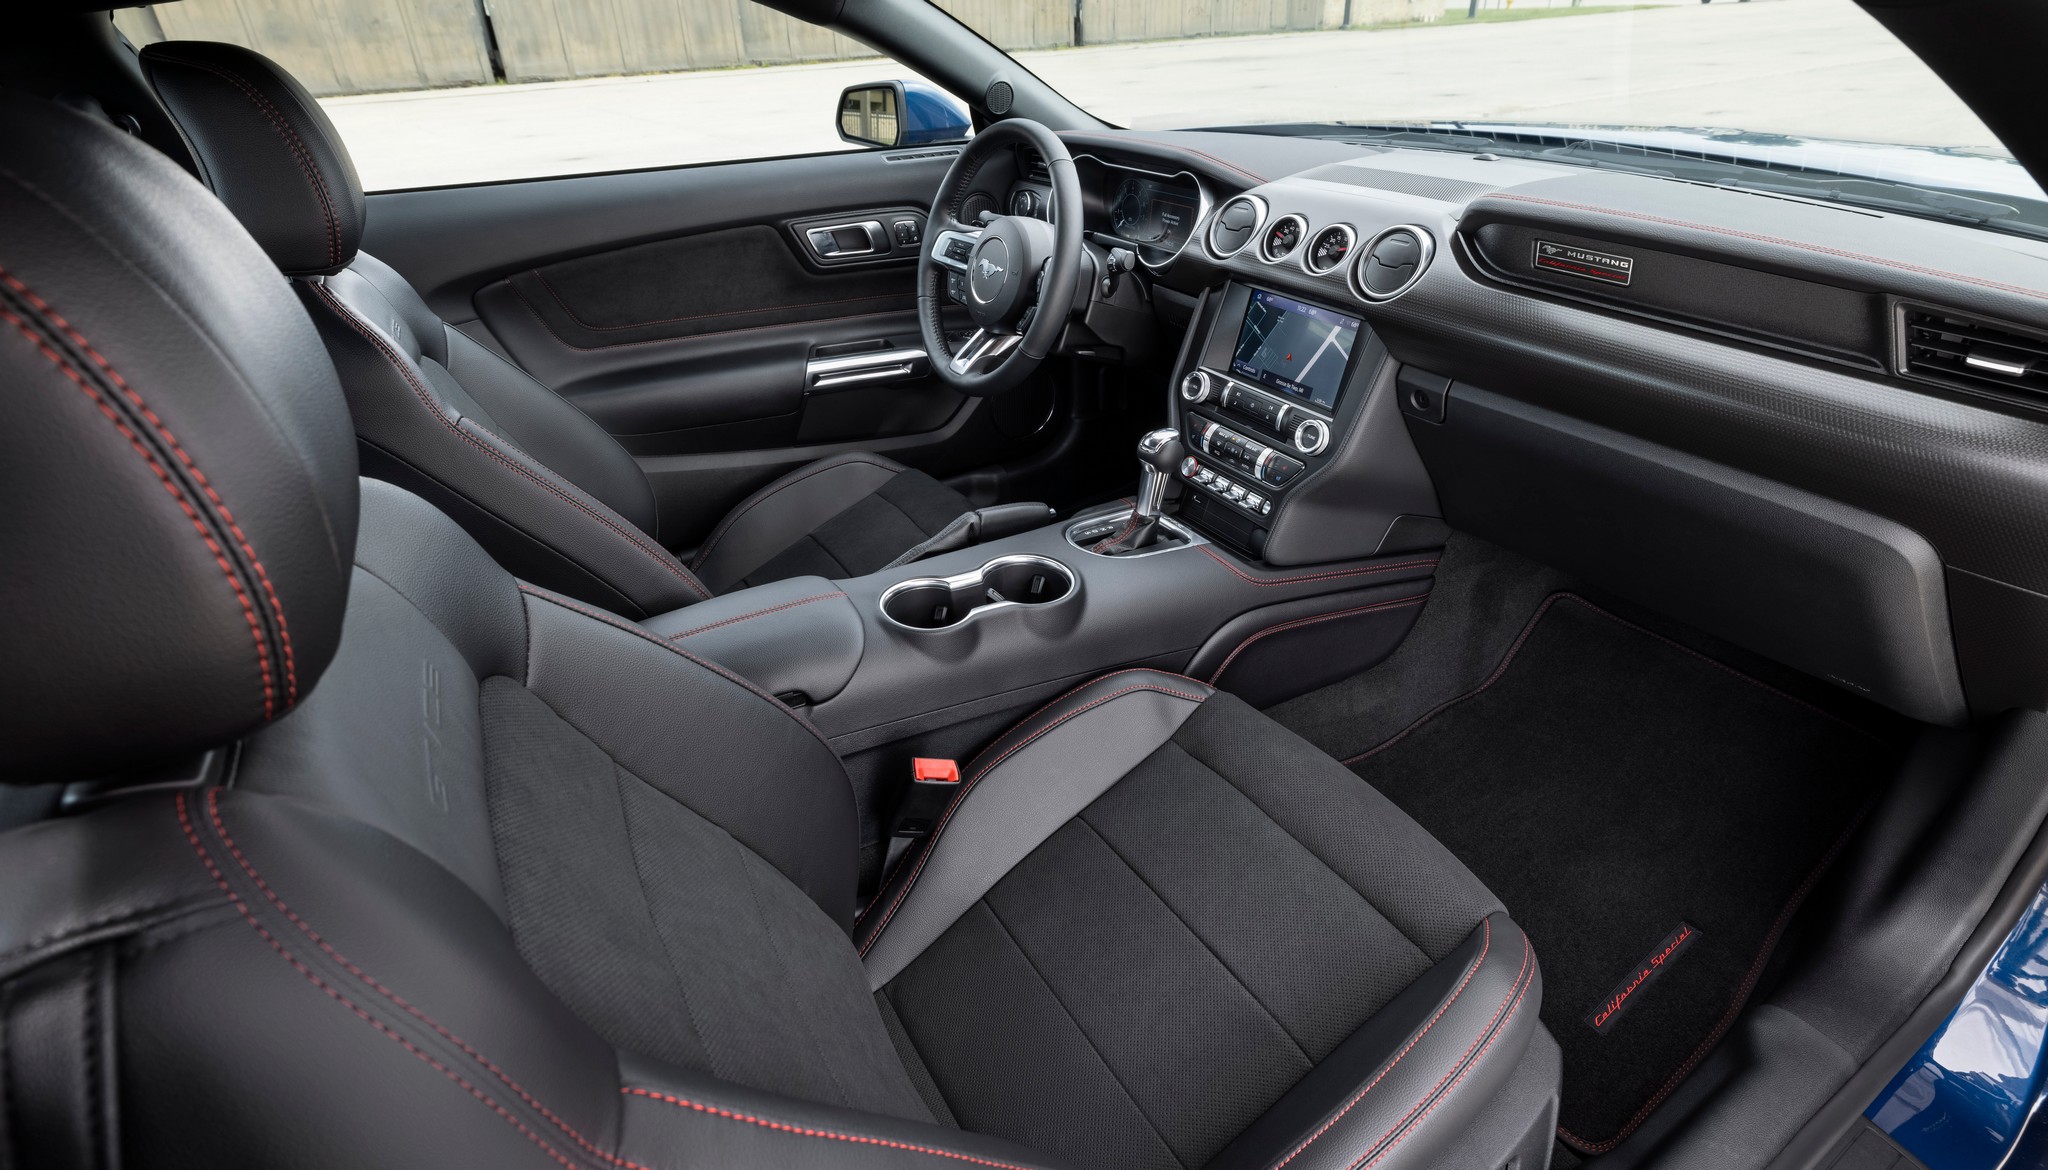 Interior view of the Ford Mustang CS/GT